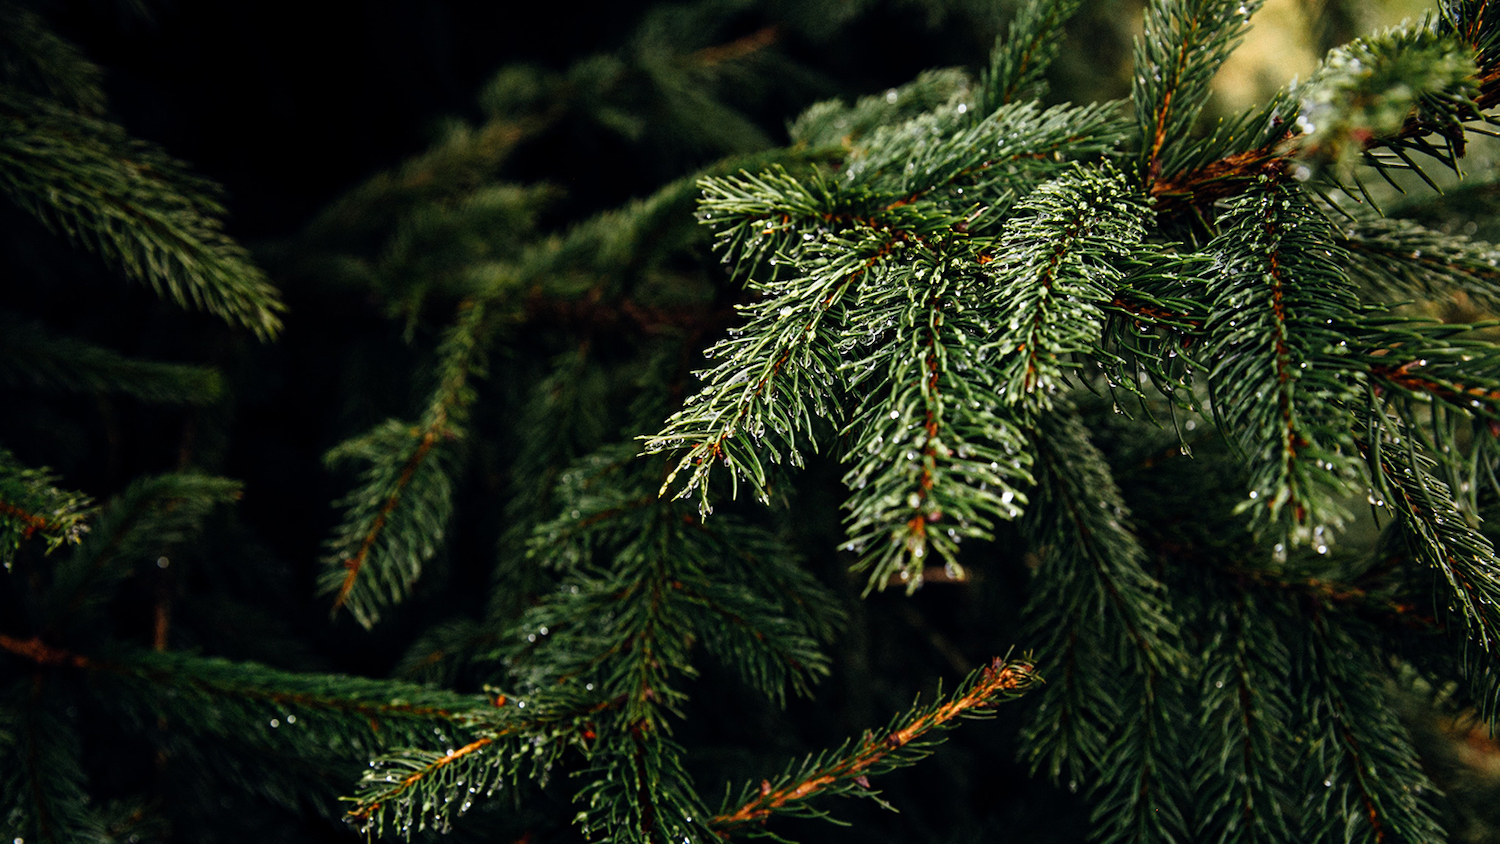 Christmas Tree - How to Keep Your Christmas Tree Fresh - College of Natural Resources News - NC State University